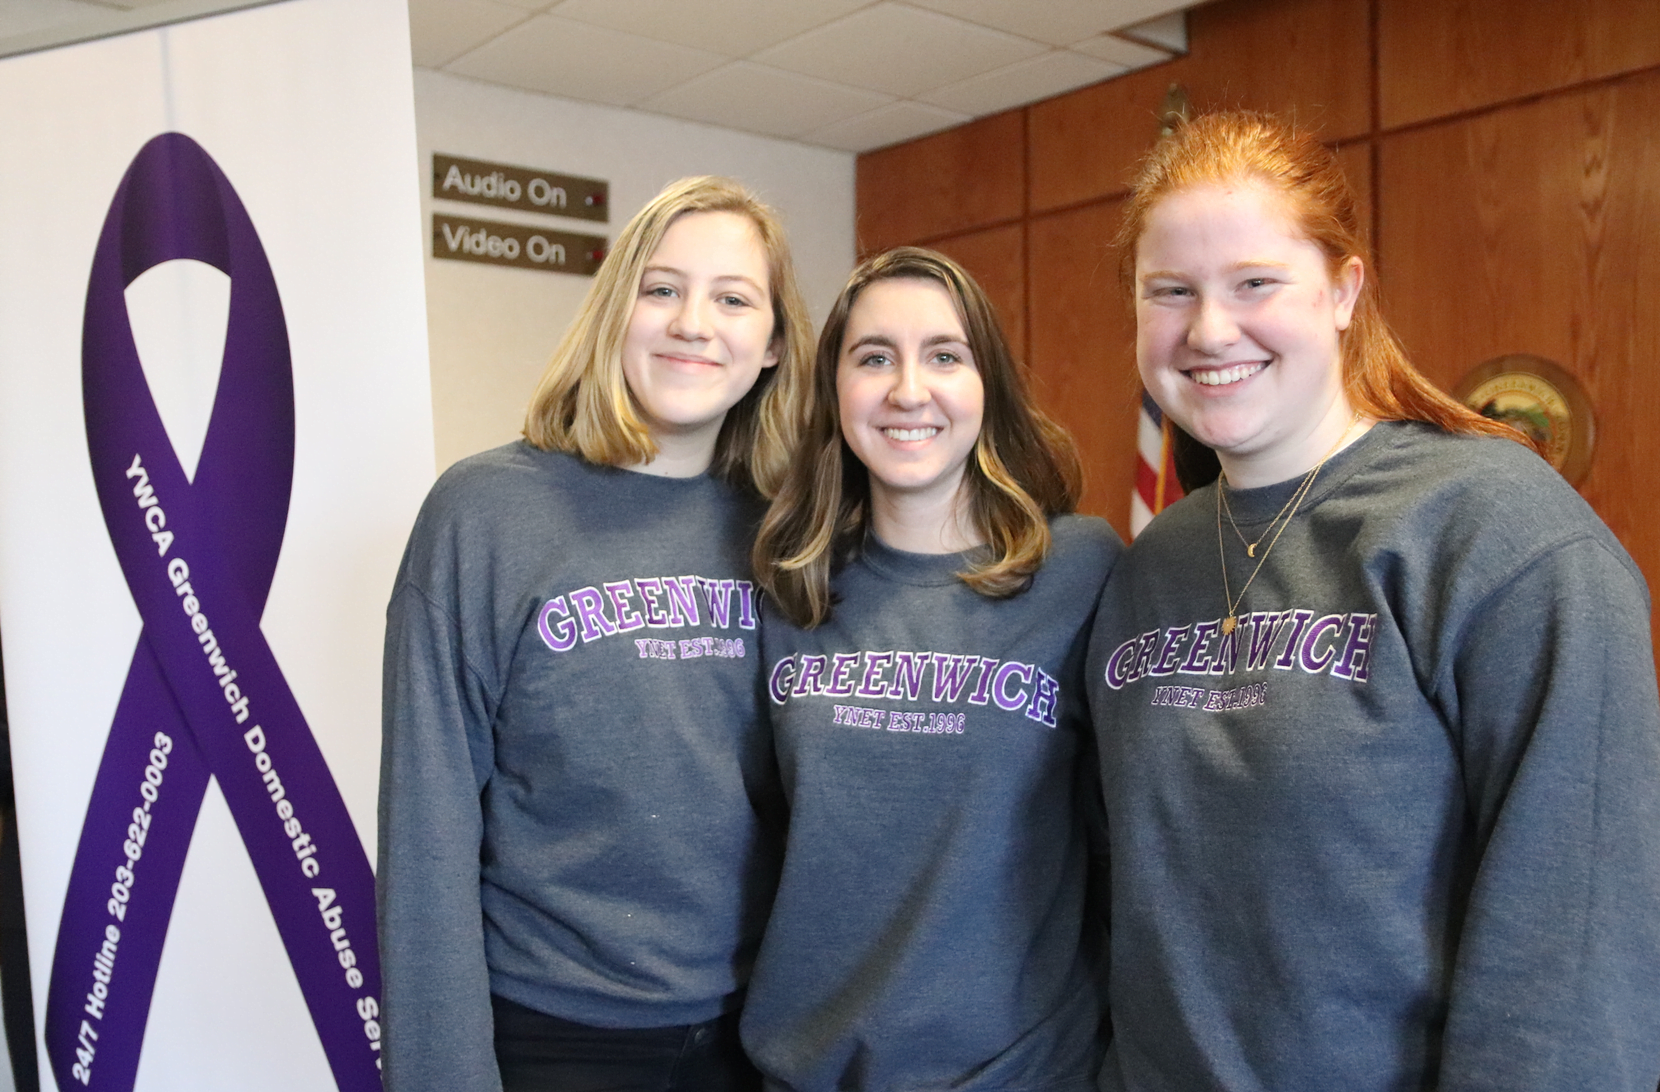 At Town Hall on Monday: Jennie Olmsted, Elizabeth Casolo and Anna DeMakes, who are leaders of YNET, a club at GHS that is sponsored by YWCA Greenwich. Feb 3, 2020 Photo: Leslie Yager